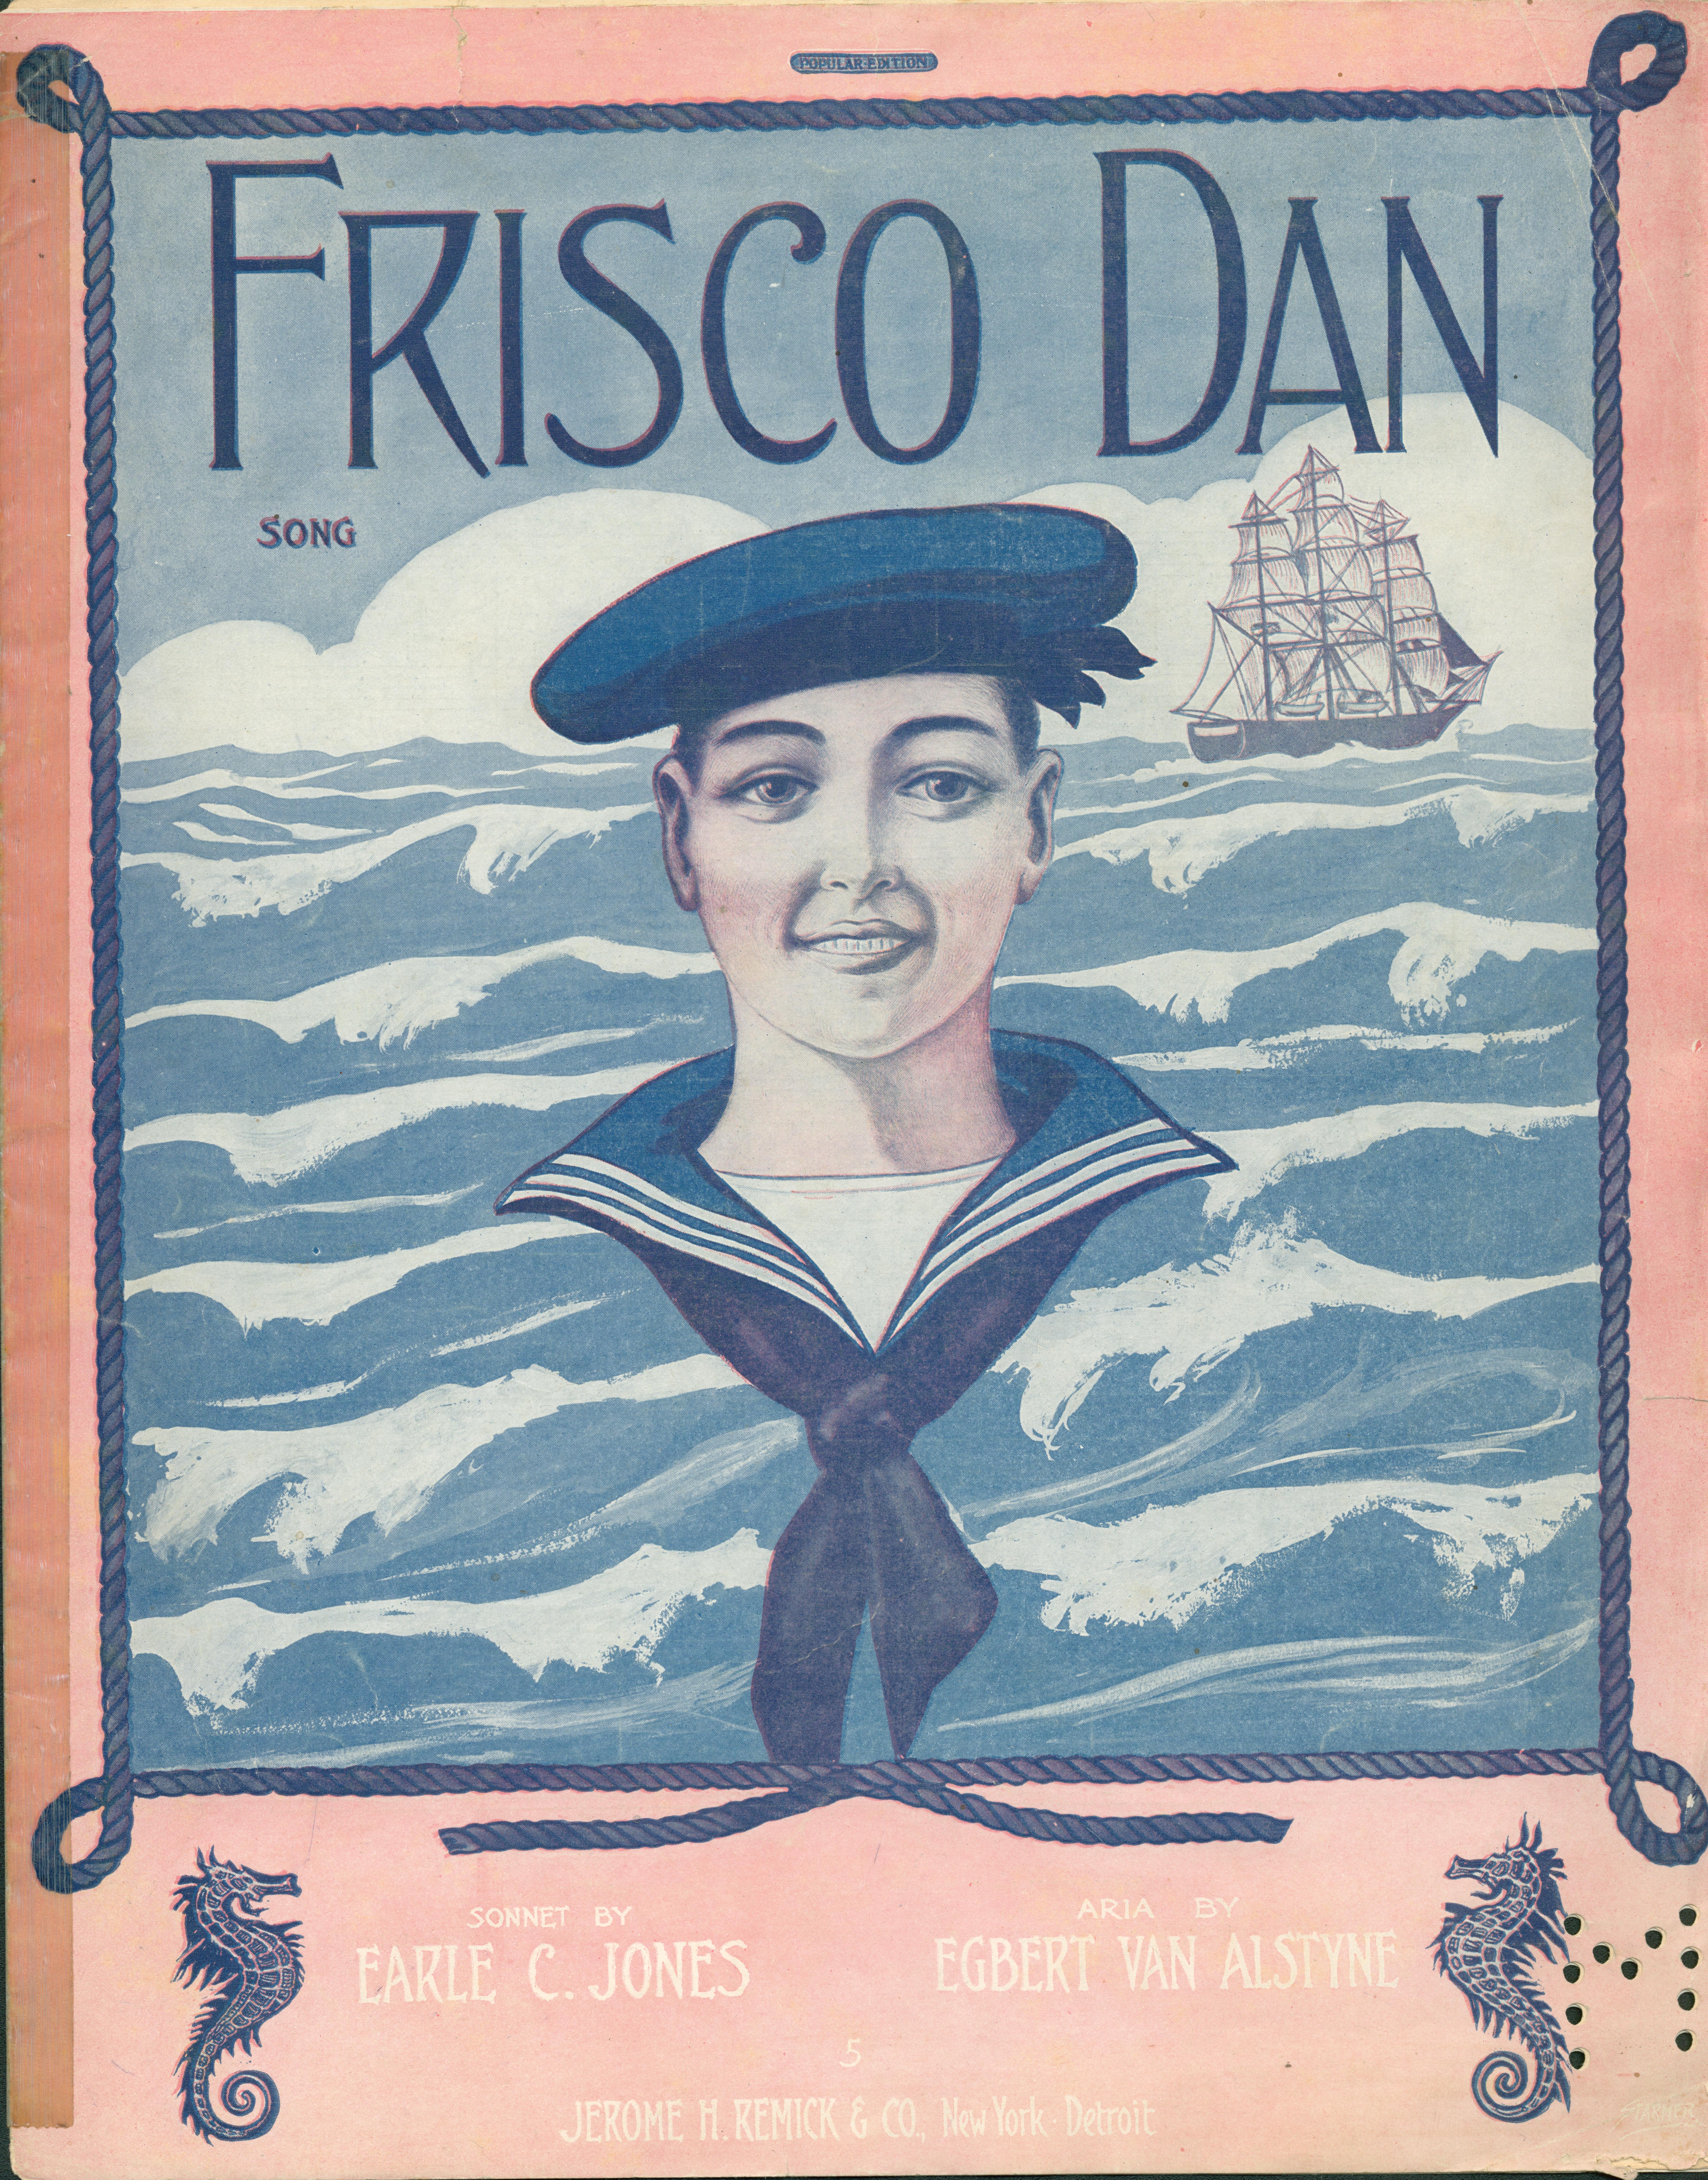 Front cover shows a sailor on the seas, with a ship in the background